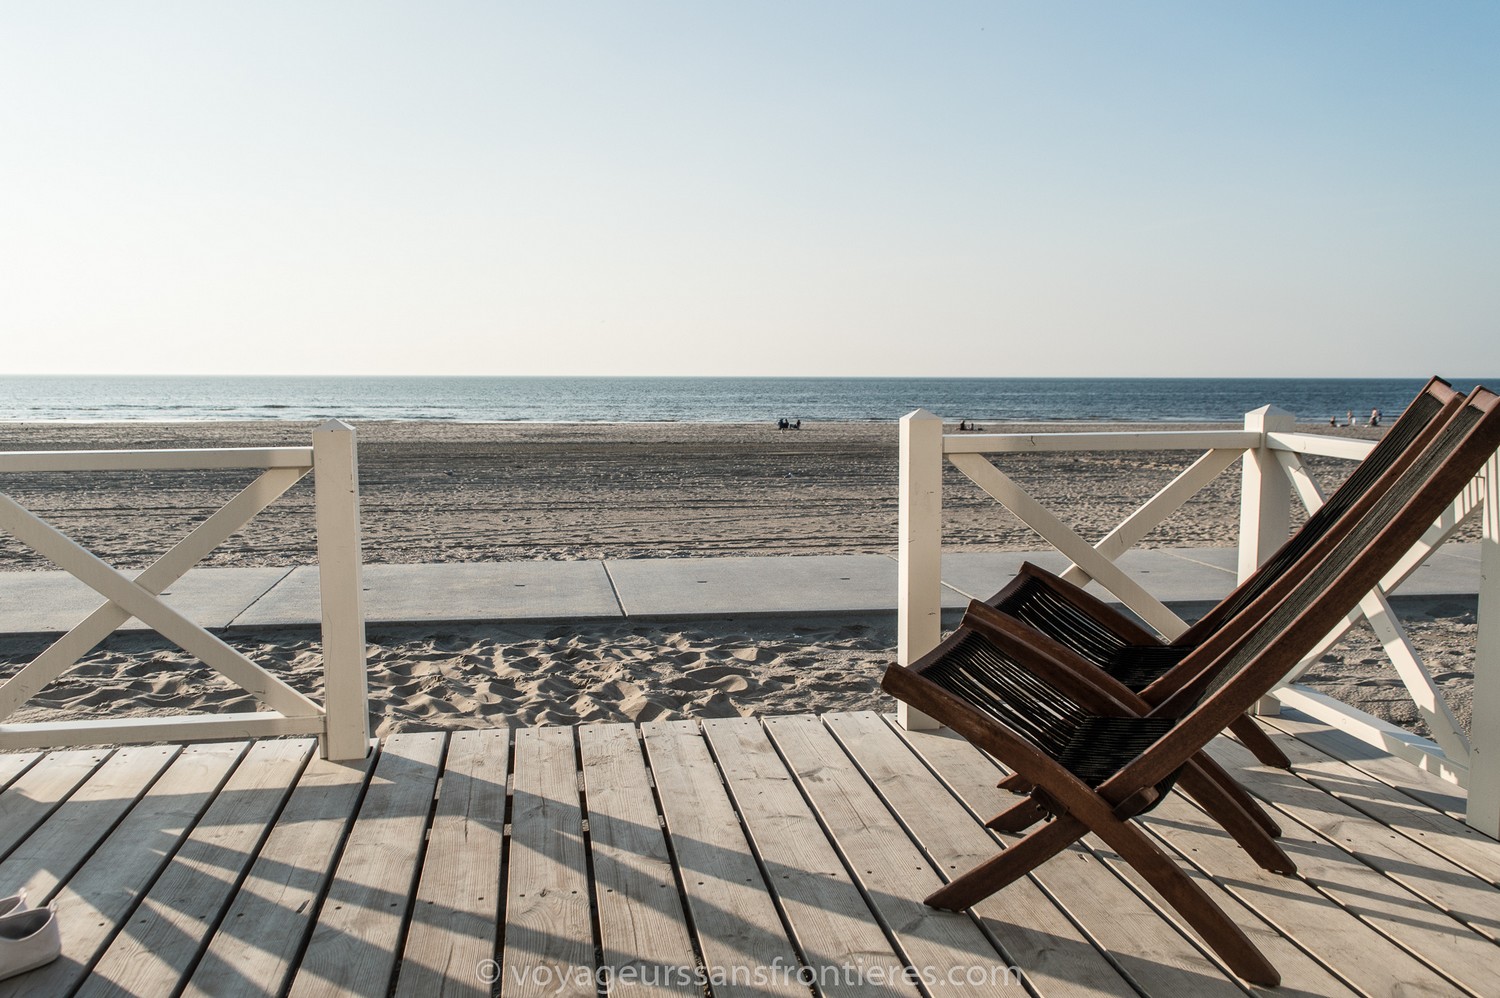 Deckchairs on the terrace of our Haagse Strandhuisjes beach house on the Kijkduin beach - The Hague, Netherlands